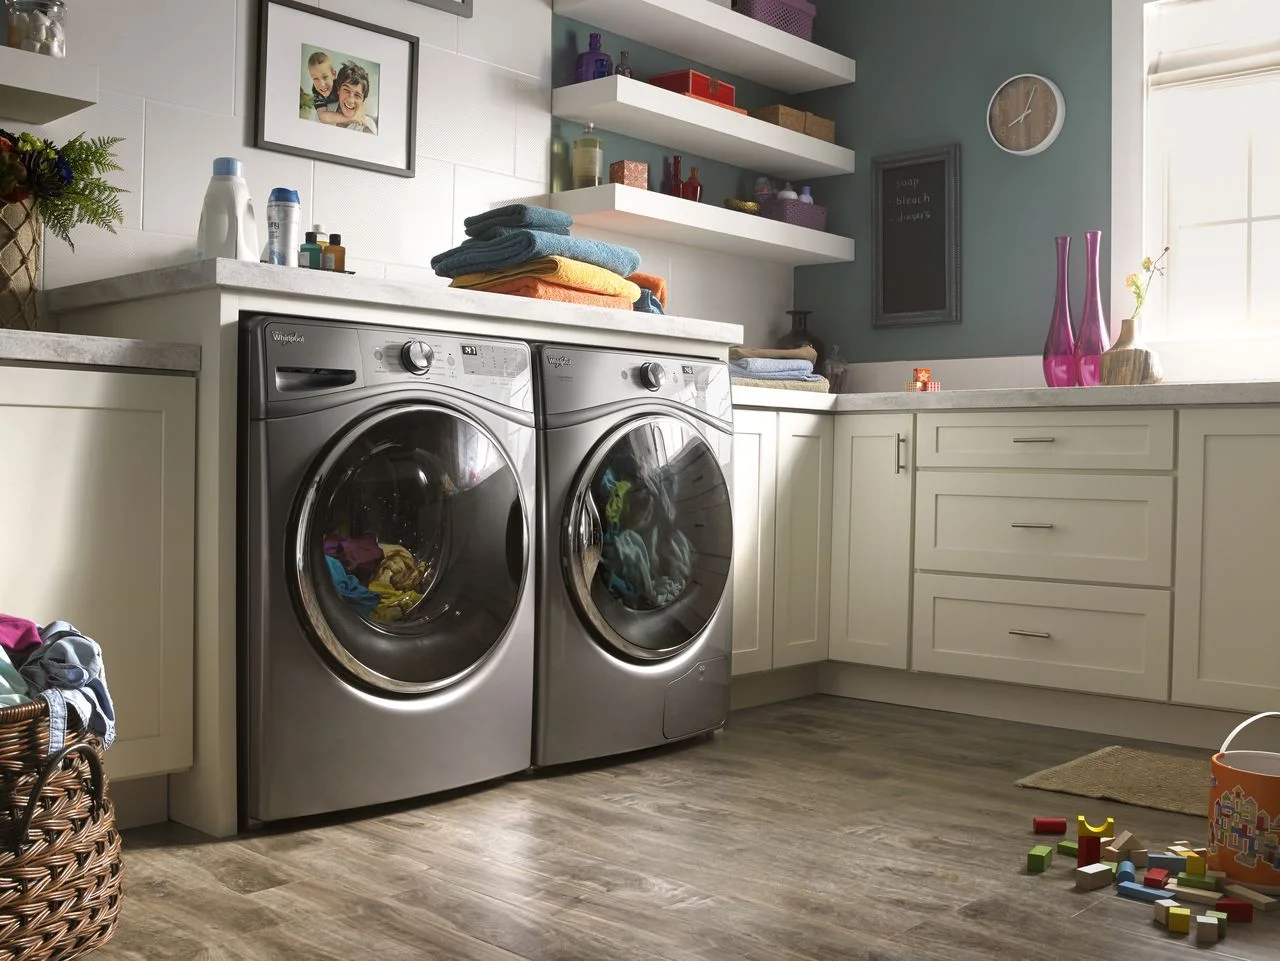 Whirlpool Washer Not Spinning: Causes and Solutions